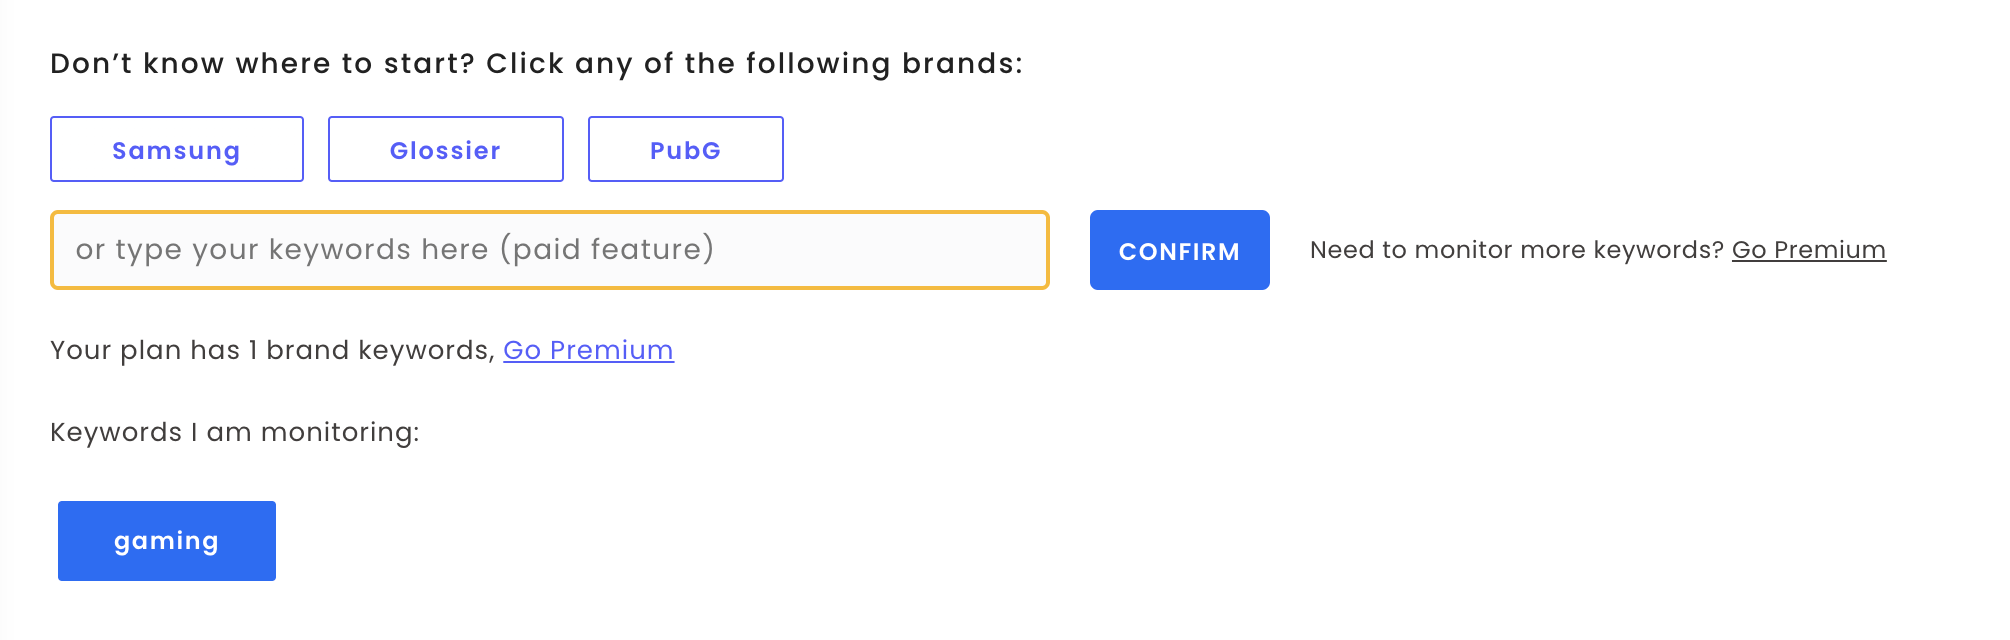 Enter your competitor's brand name